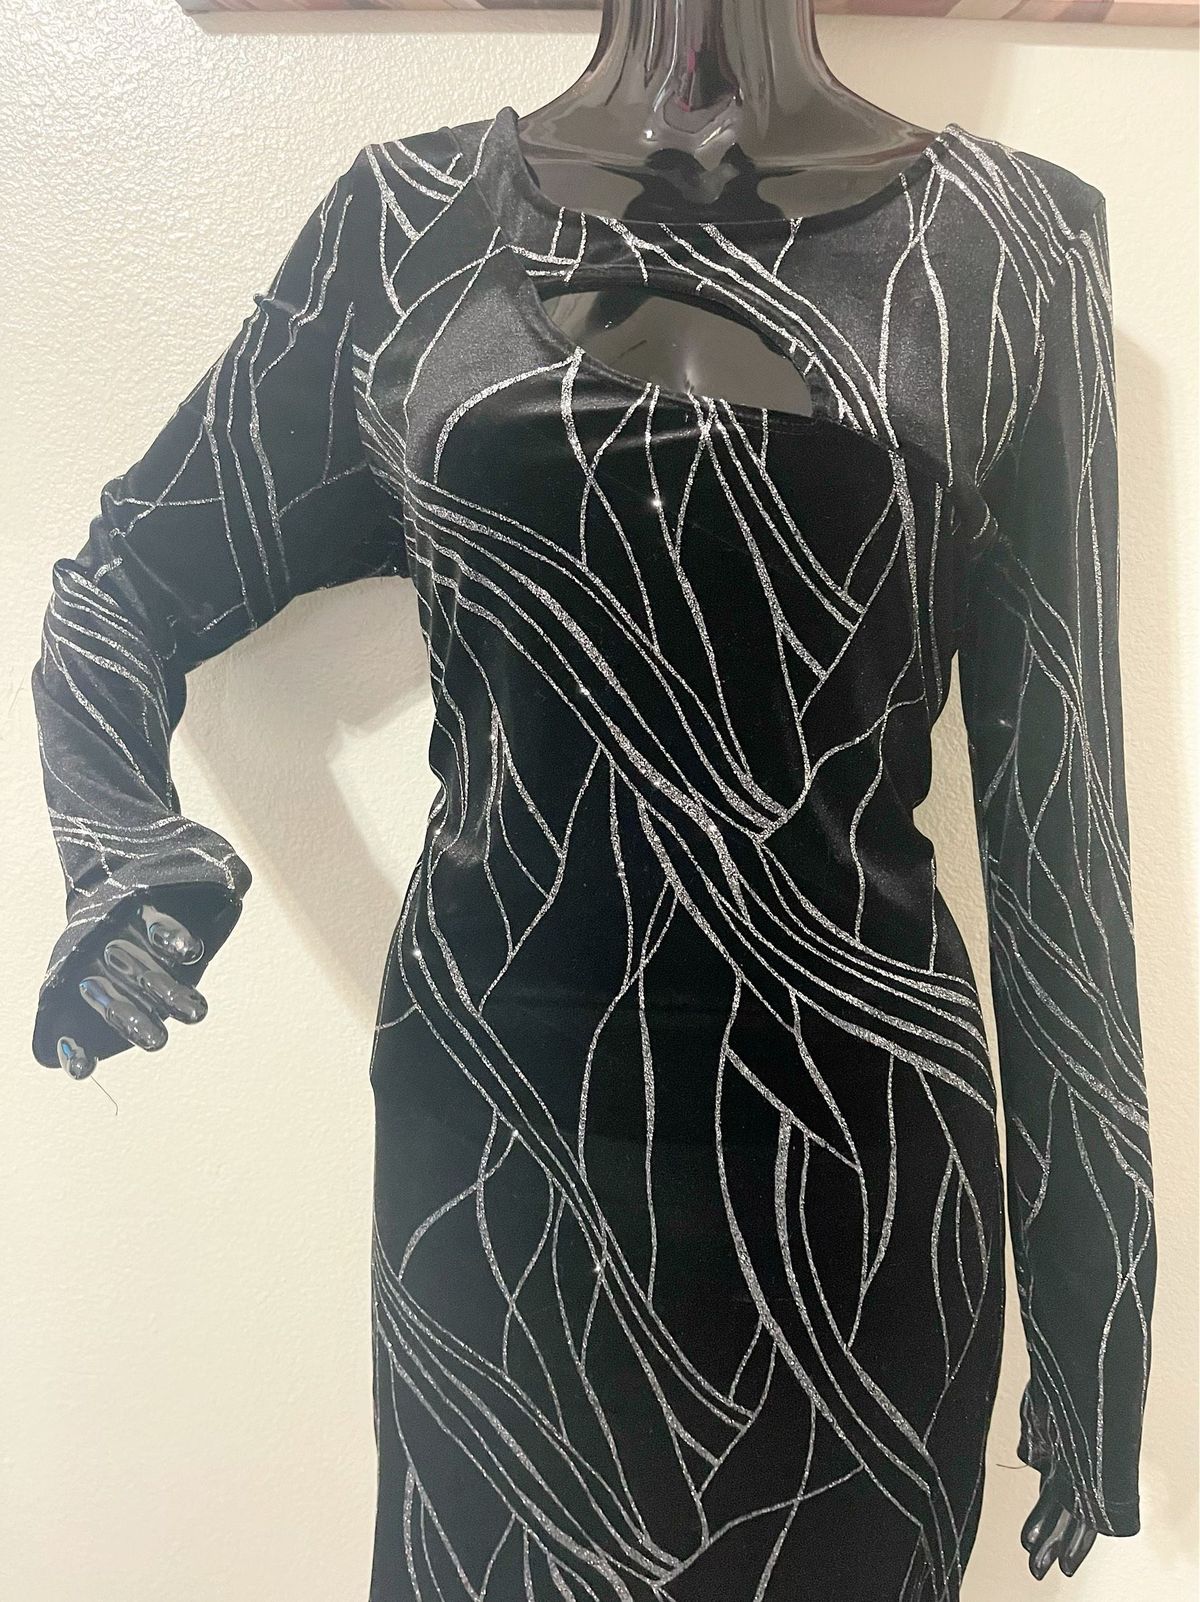 Size 12 Nightclub Long Sleeve Black Cocktail Dress on Queenly